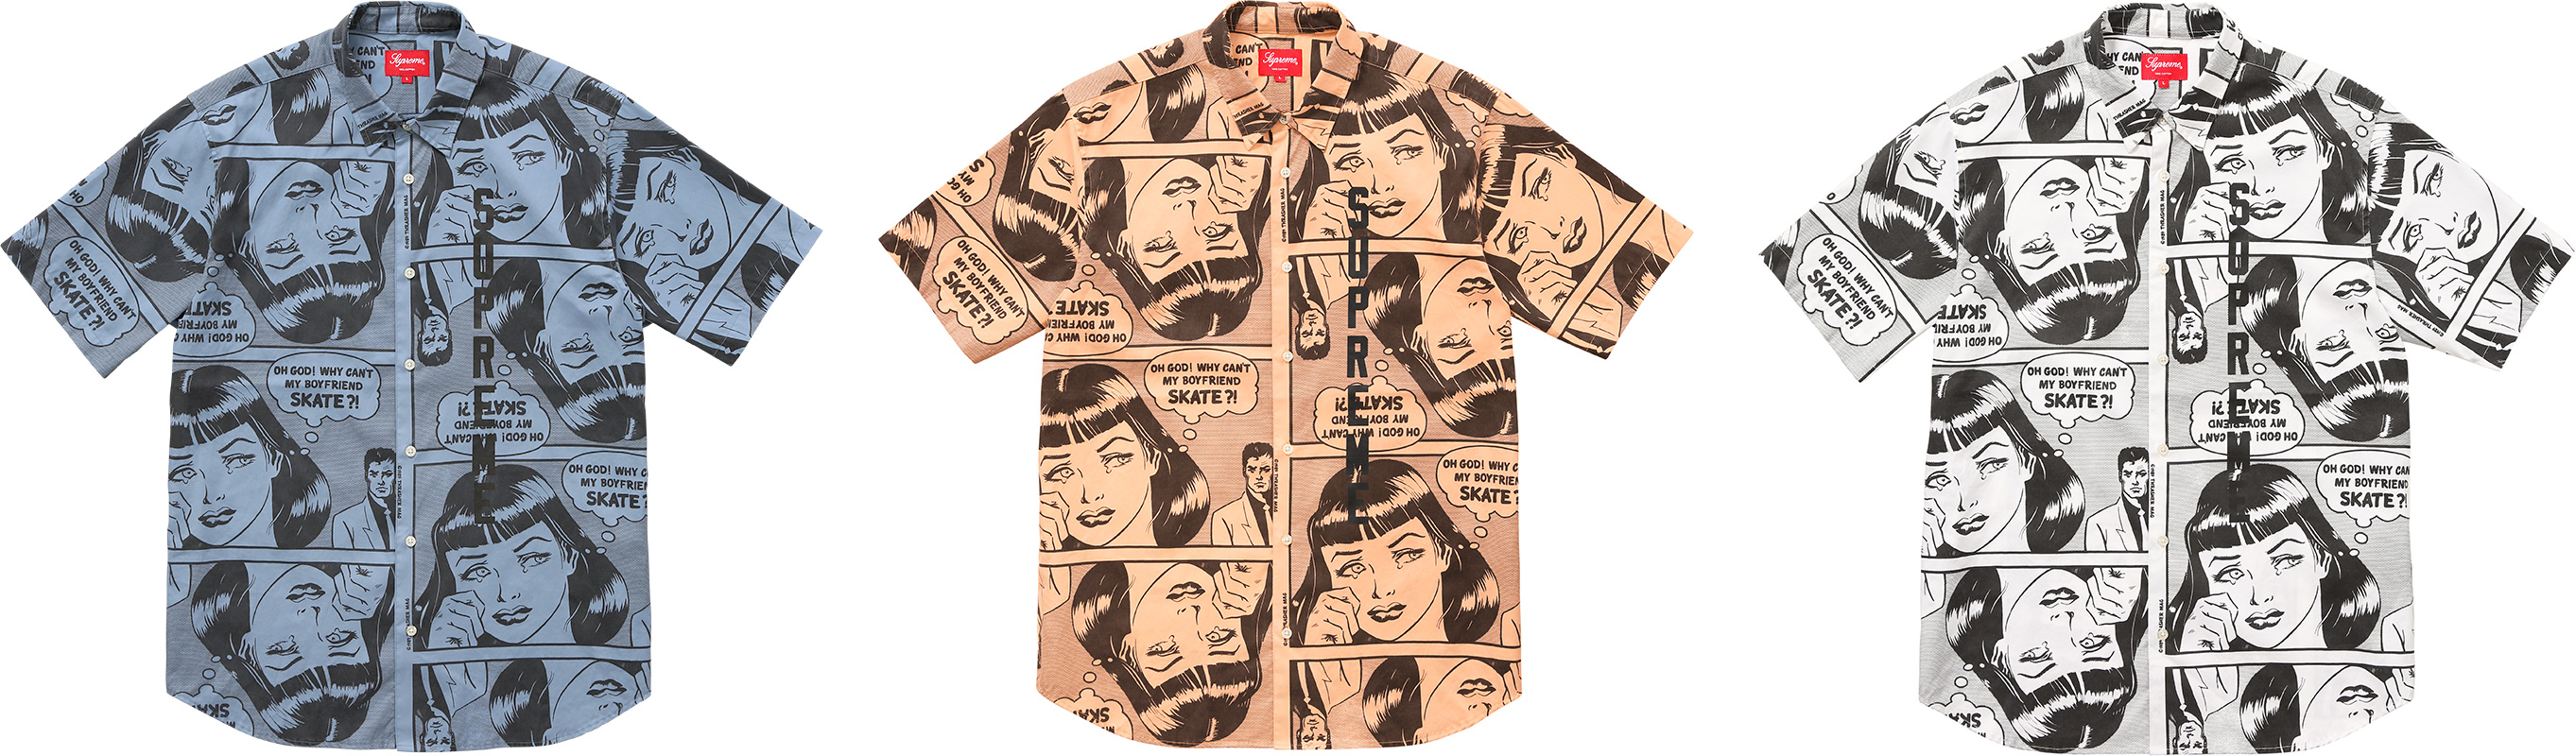 Ranking the Most Iconic Supreme Tees